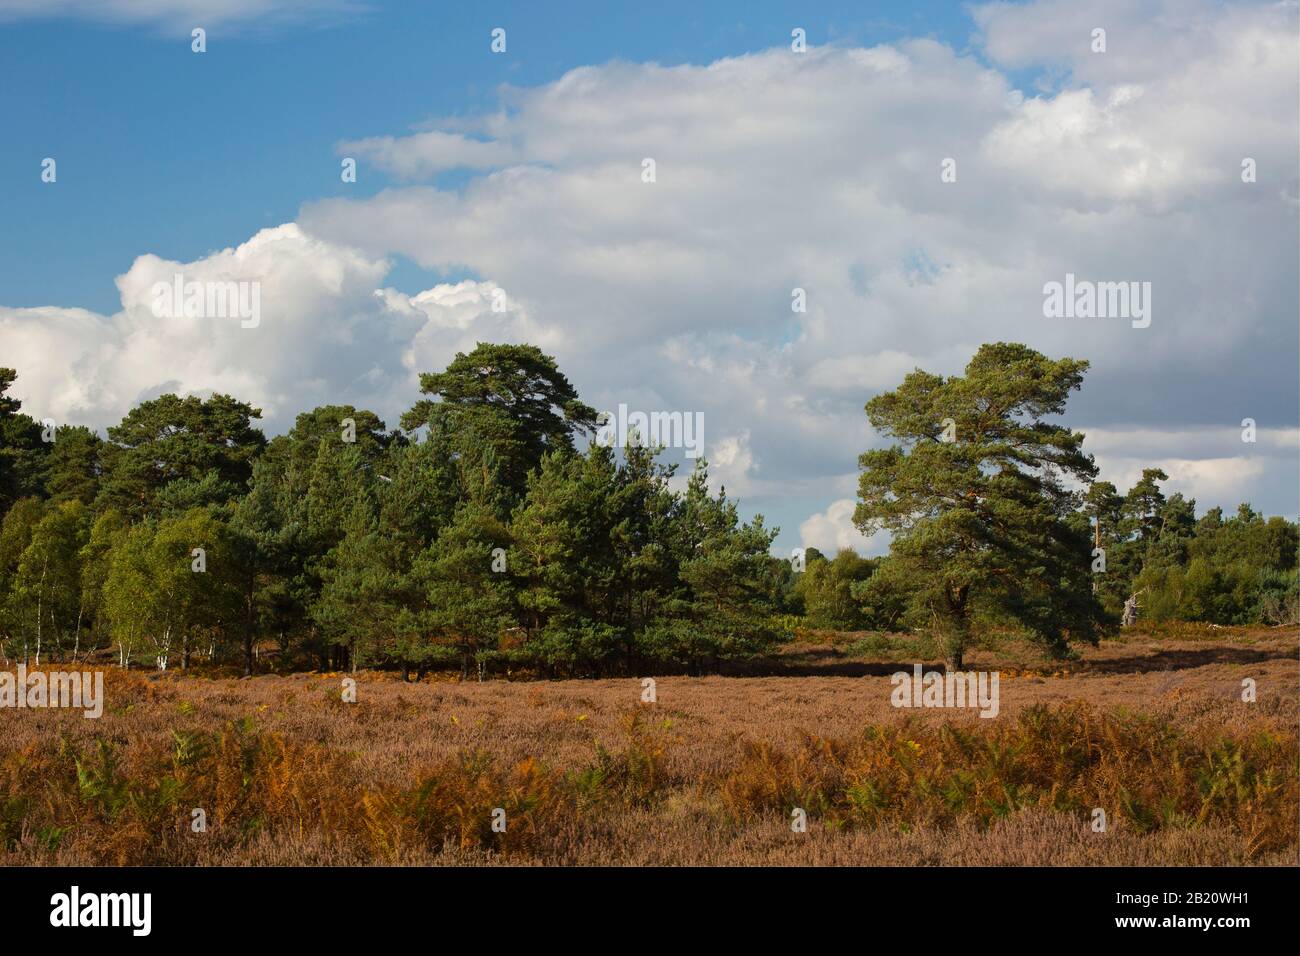 Coastal forest and heathland in Suffolk, England with heather and scots pine trees Stock Photo